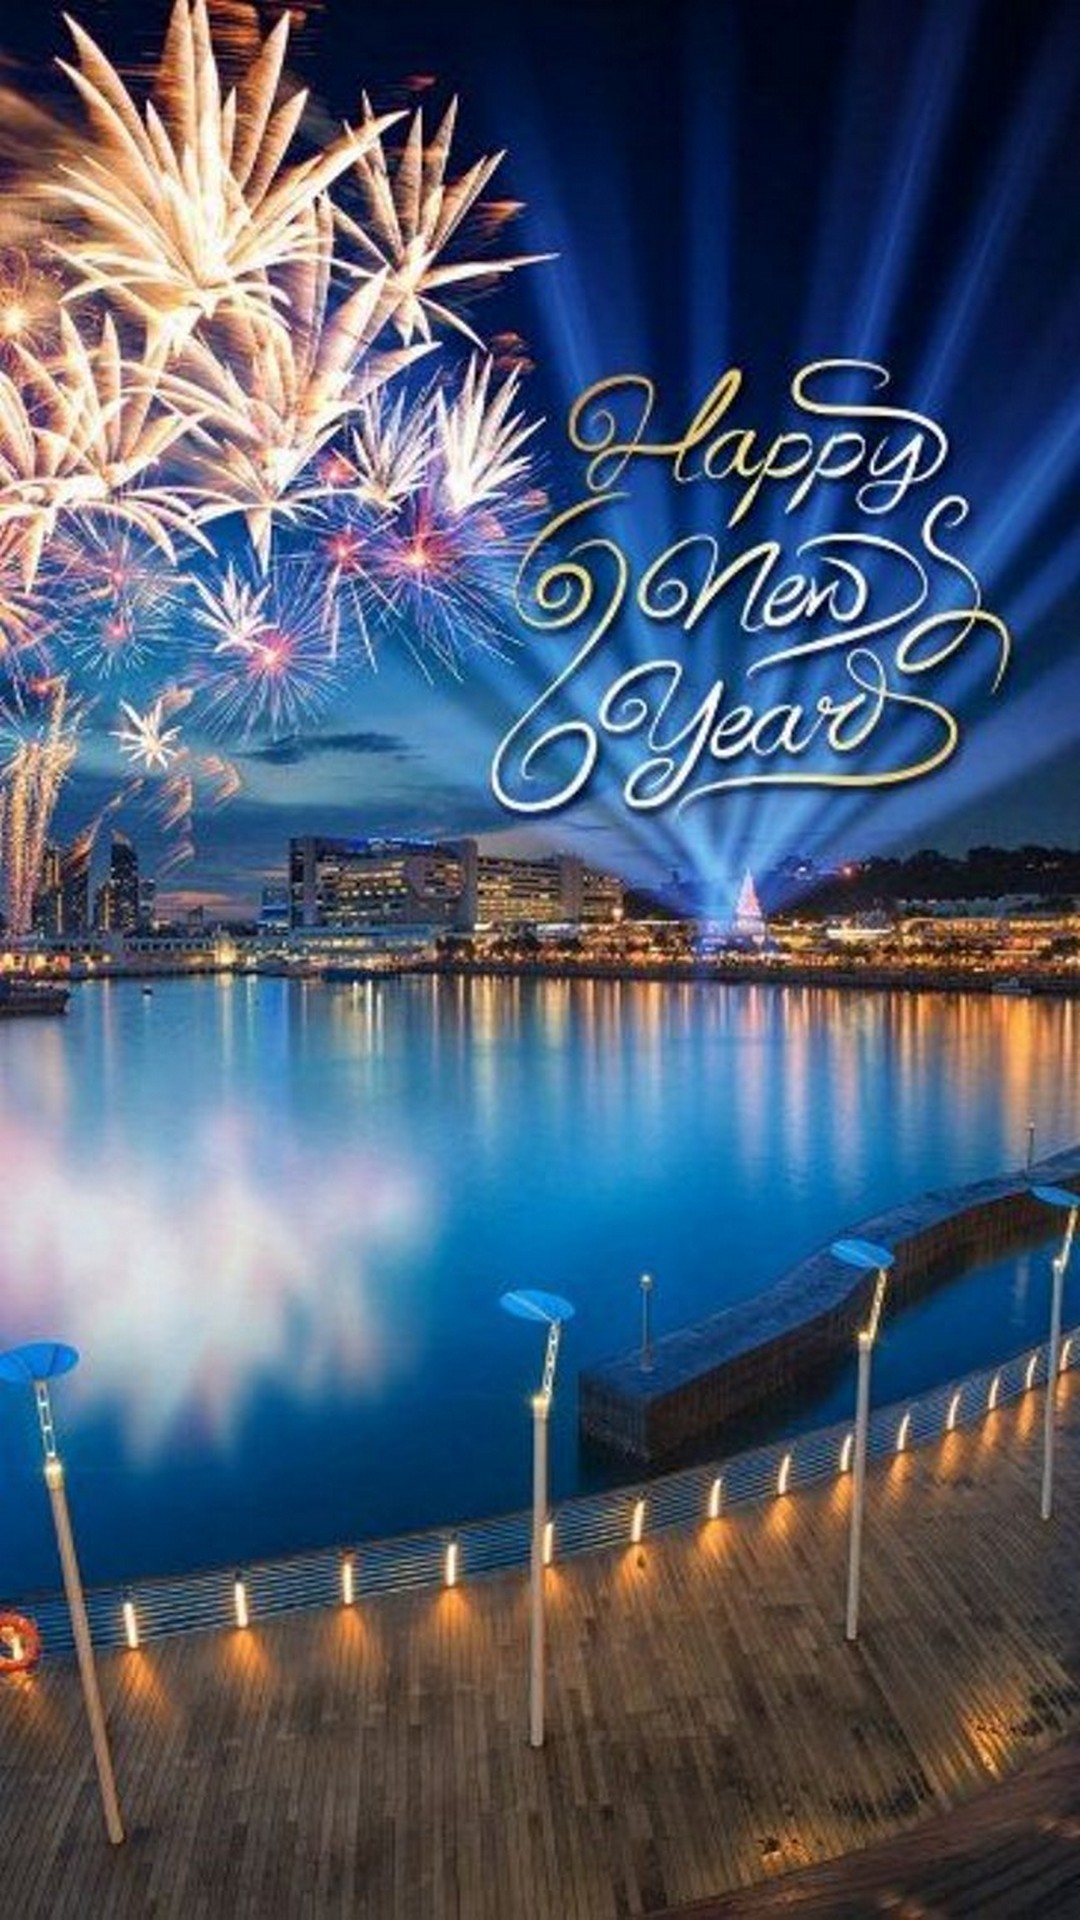 iPhone Wallpaper Happy New Year Full Size